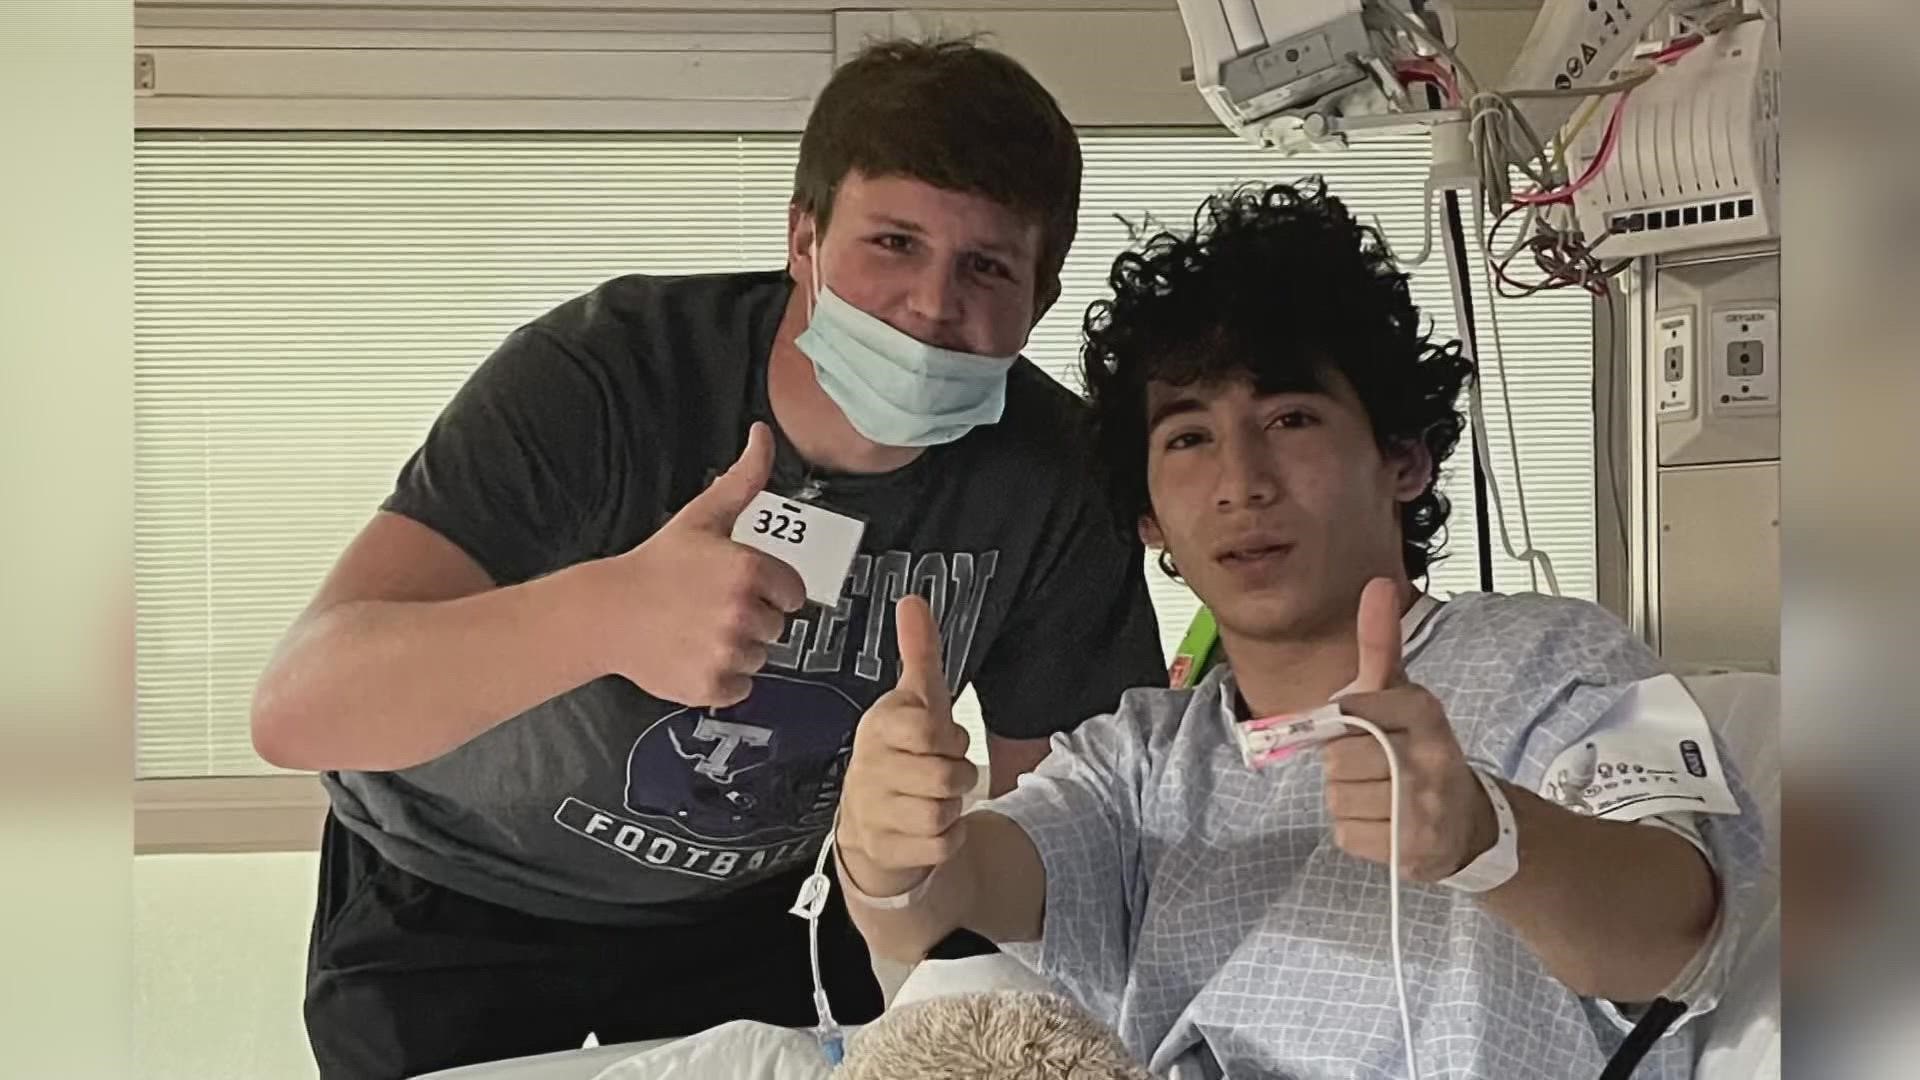 Senior receiver and linebacker, Luis Rodriguez, was taken to the hospital Thursday night after suffering a brain bleed during the Crawford vs Hawley semi final game.